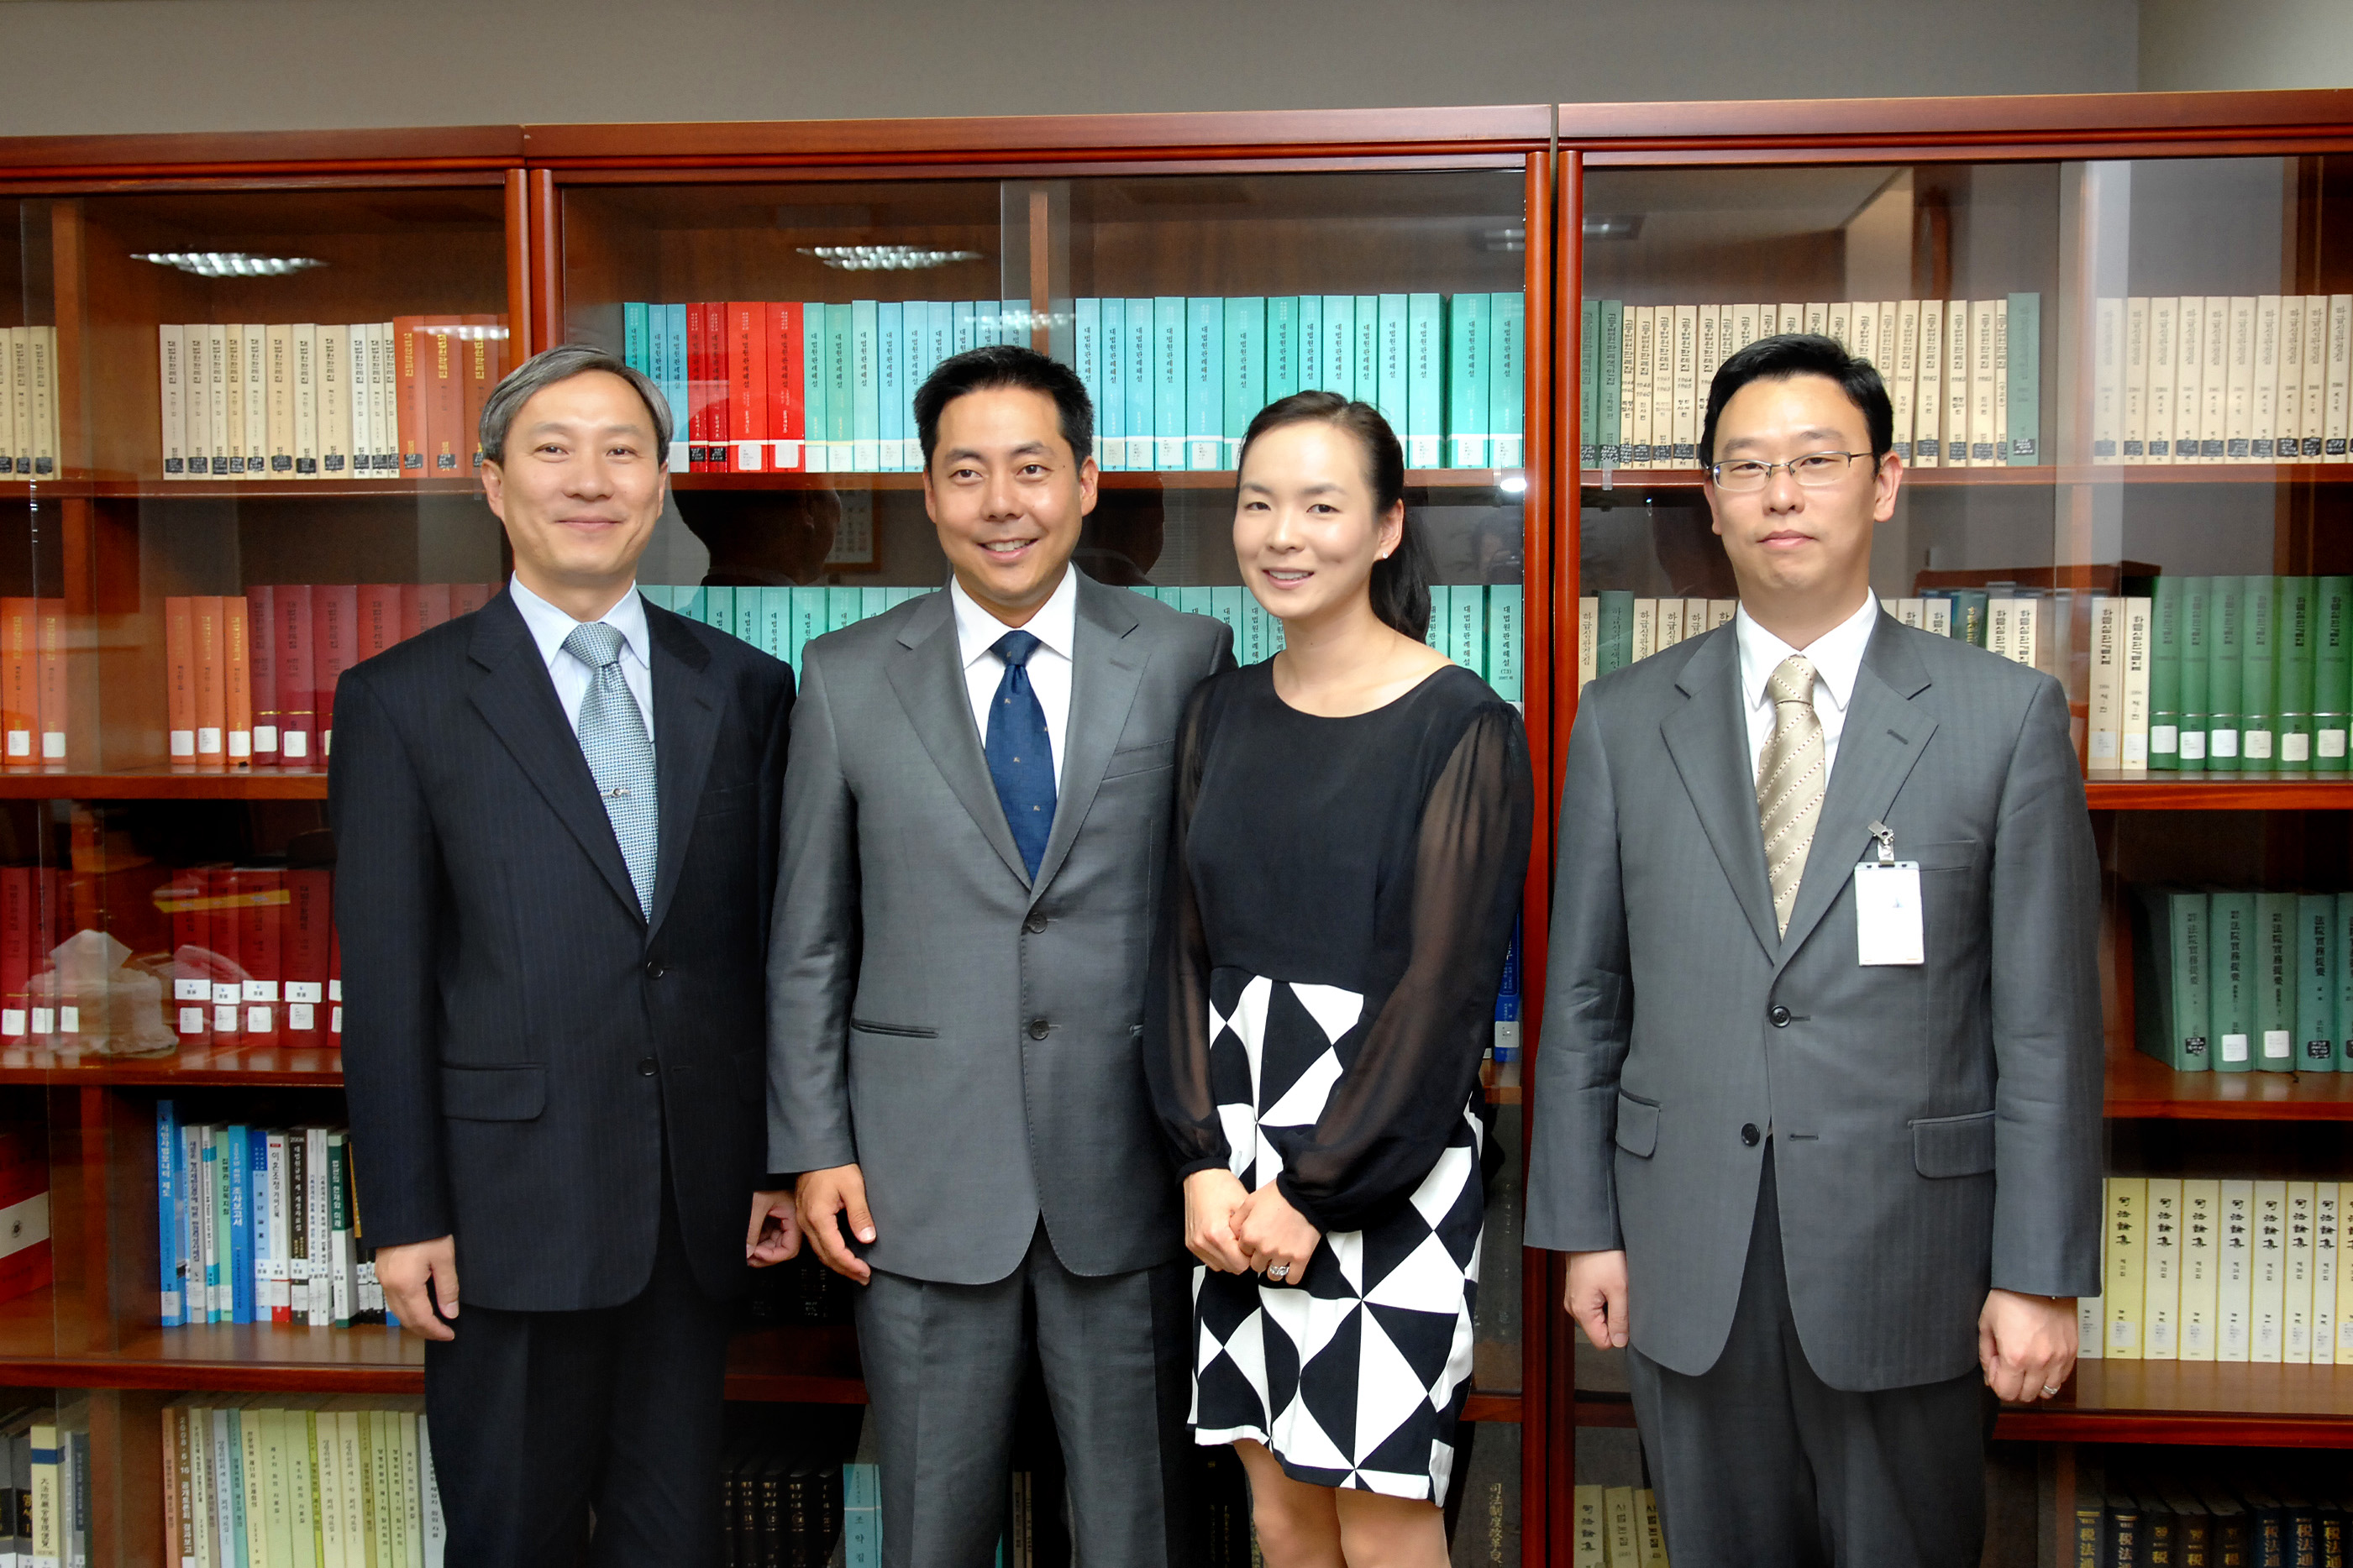 [05_28_09]Judge Chris LEE of the North Las Vegas Justice Court visits the Supreme Court of Korea